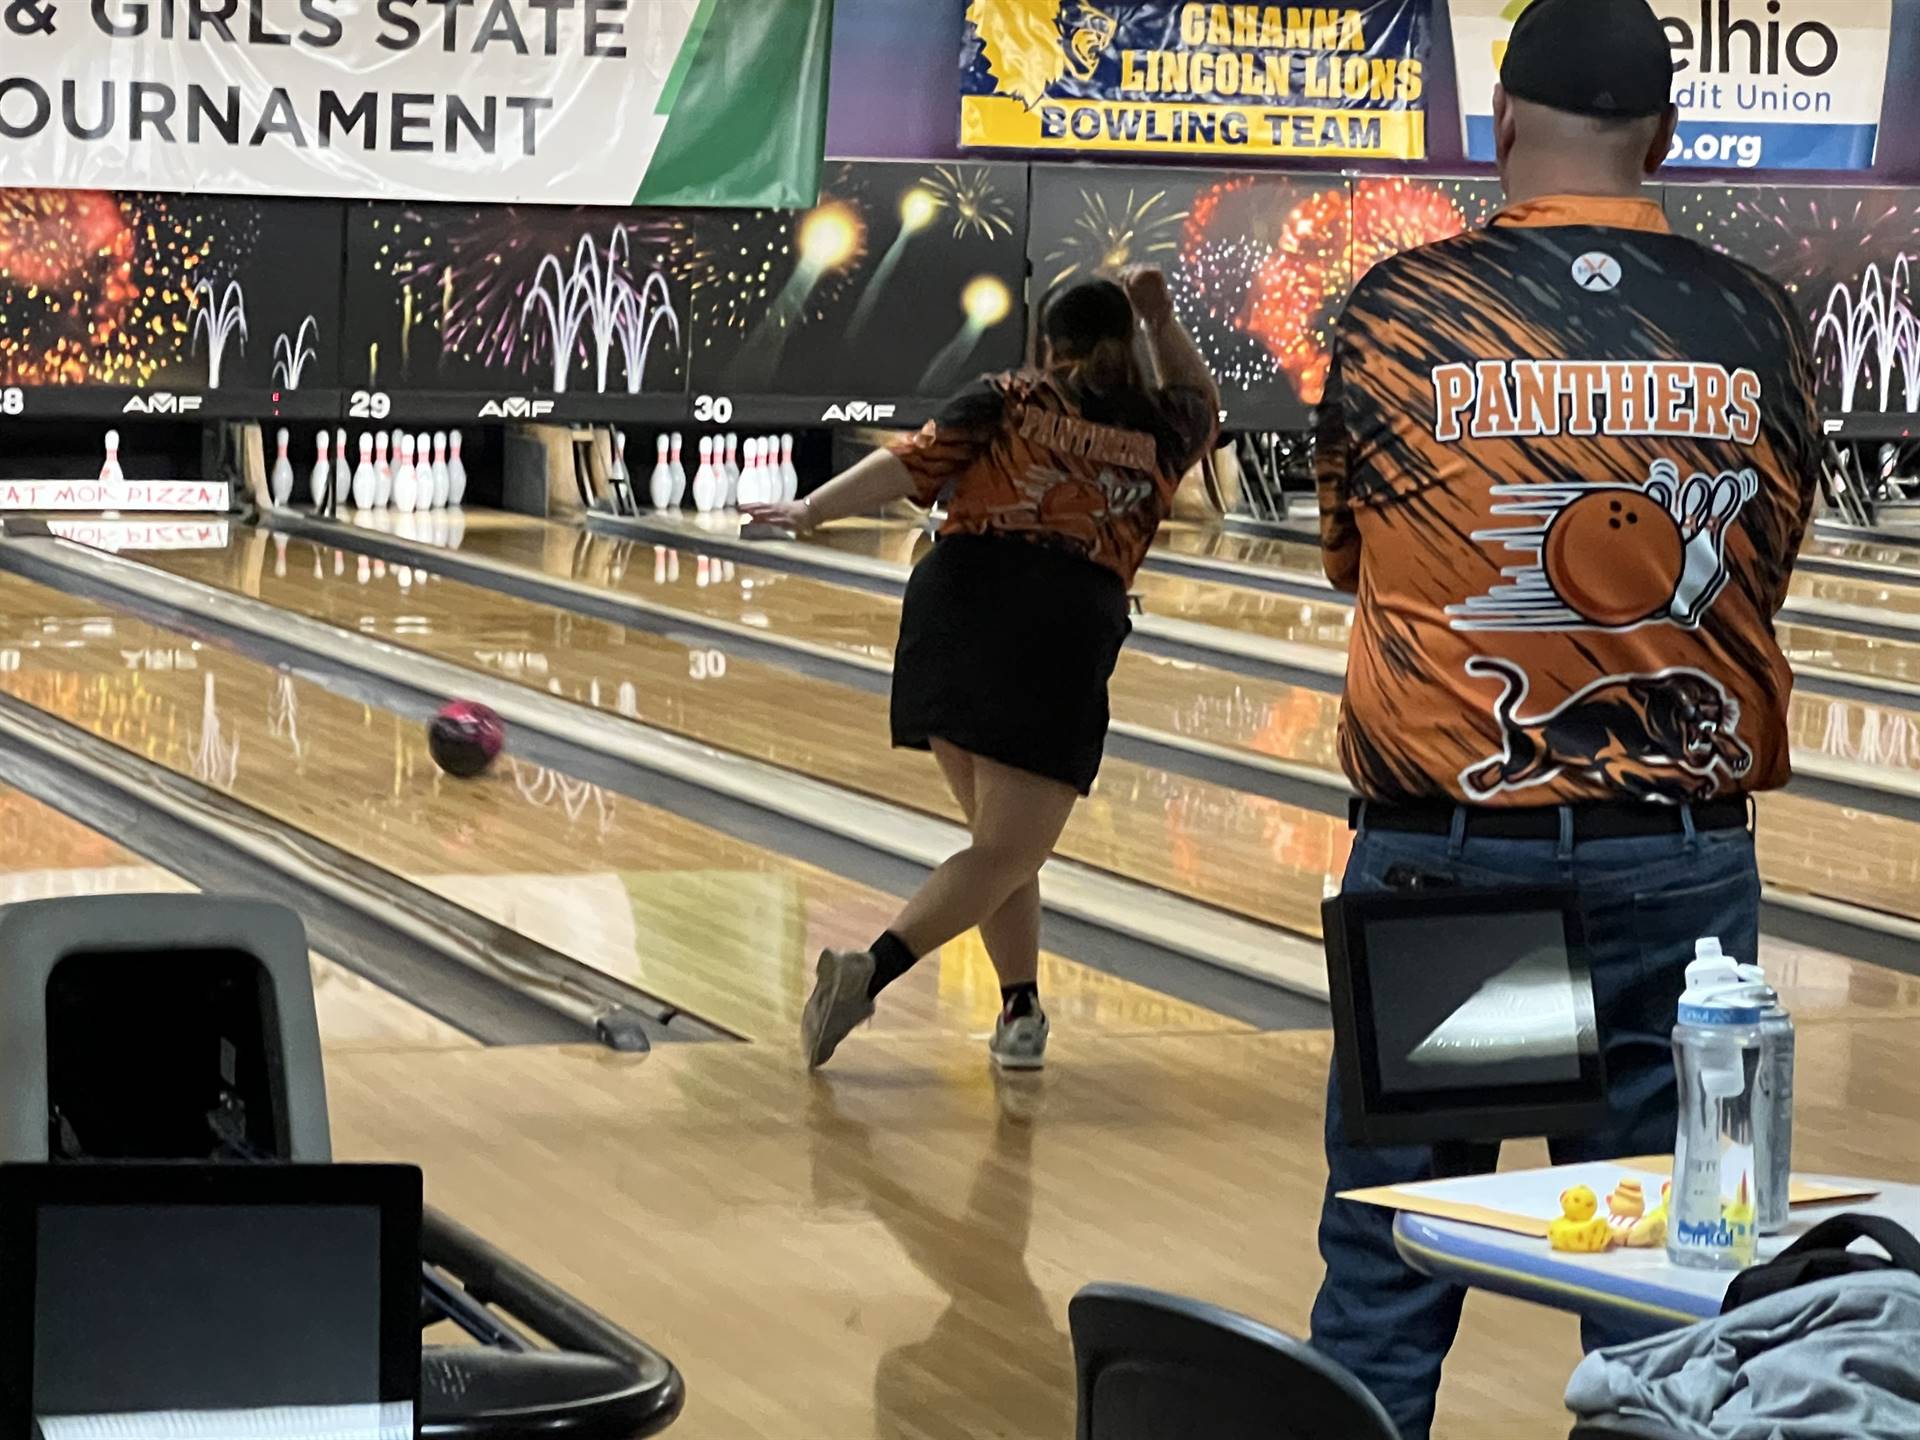 Samantha Fiore Bowling in the State Tournament 